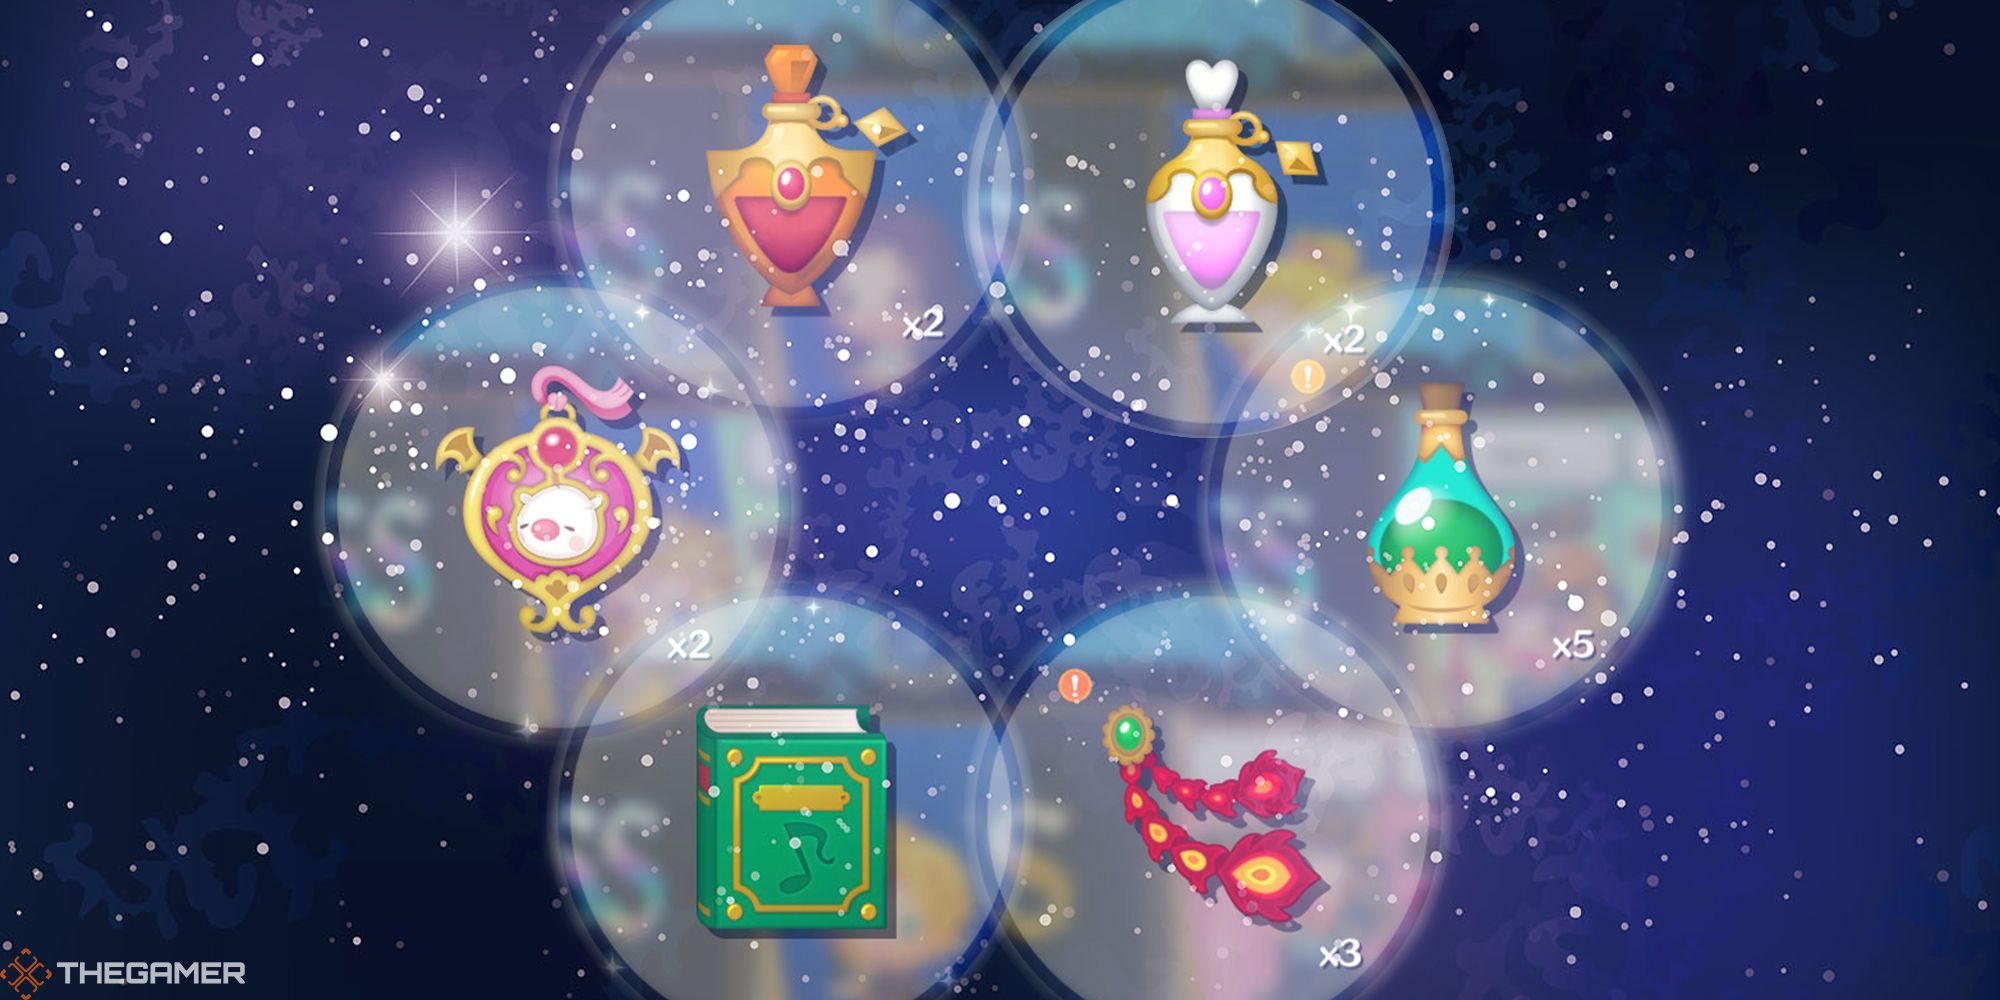 Six items from Theatrhythm: Final Bar Line converge in a circle against a starry blue galactic sky.